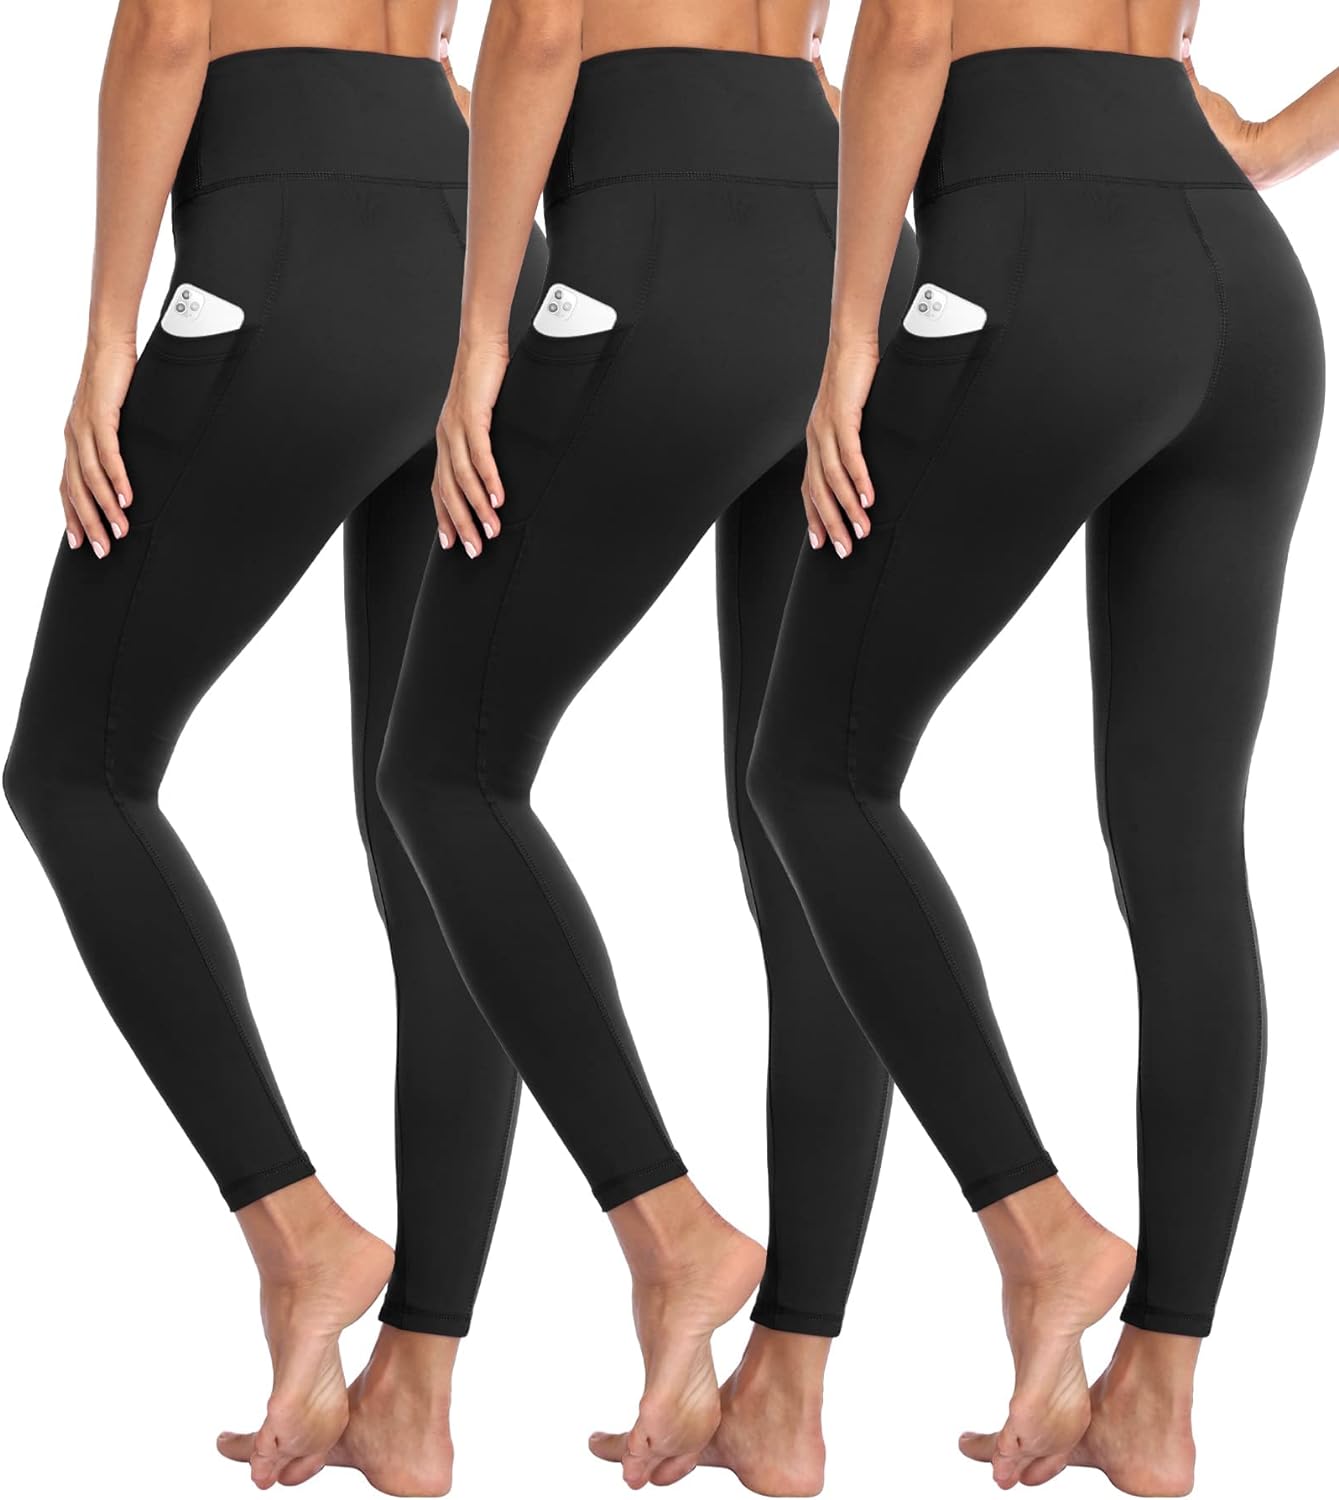 GAYHAY 3 Pack Leggings with Pockets for Women - High Waisted Tummy Control Workout Yoga Pants Compression Black Leggings